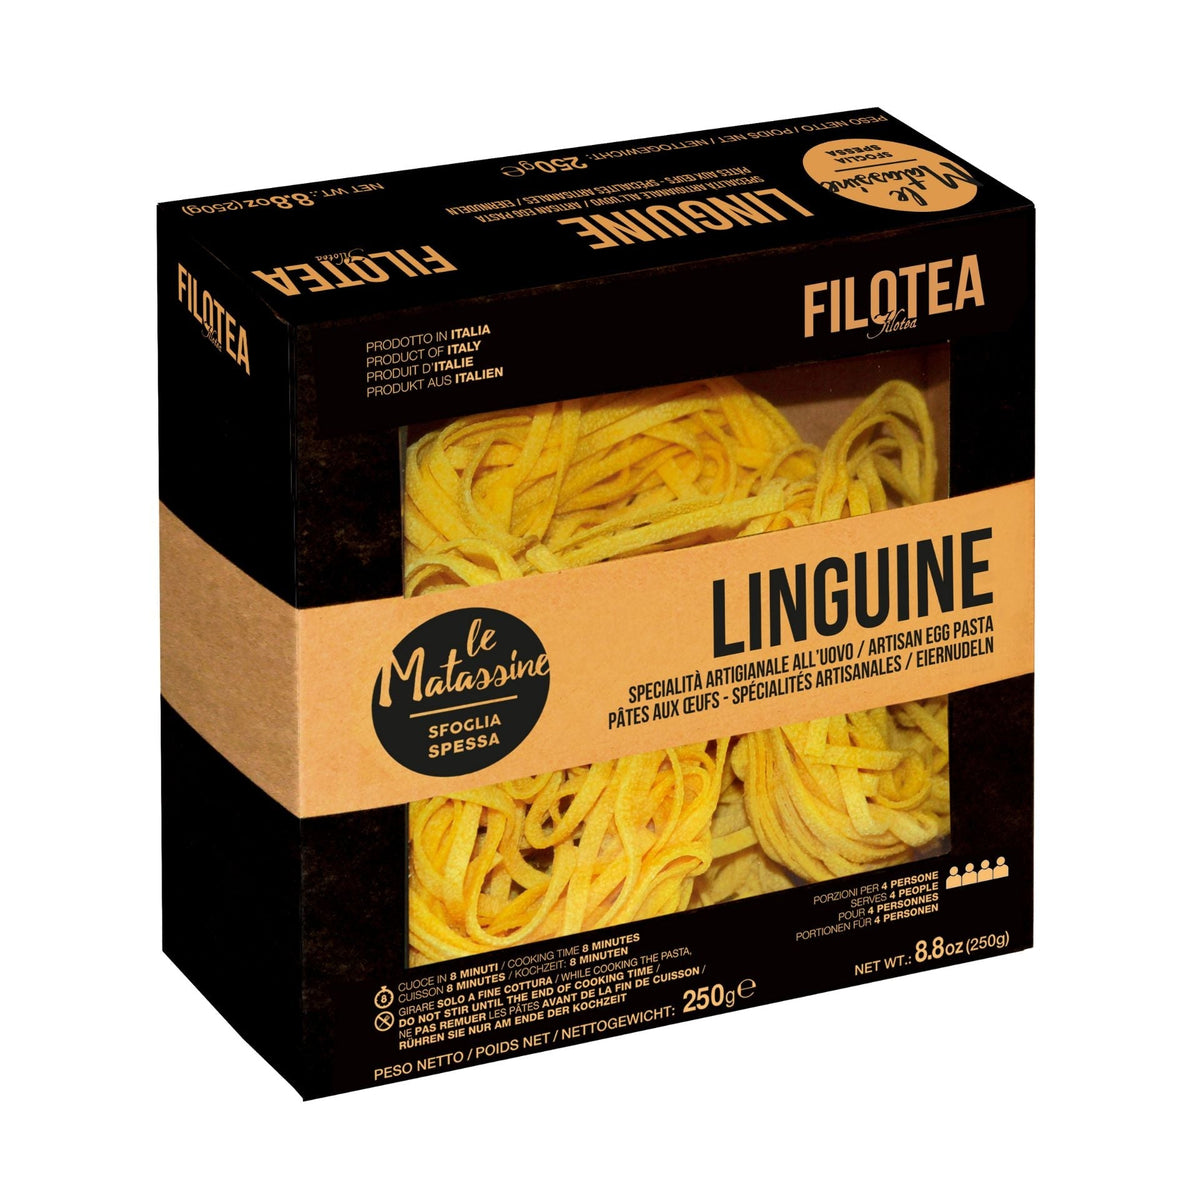 Filotea Le Matassine Linguine Nest Artisan Egg Pasta 250g  | Imported and distributed in the UK by Just Gourmet Foods